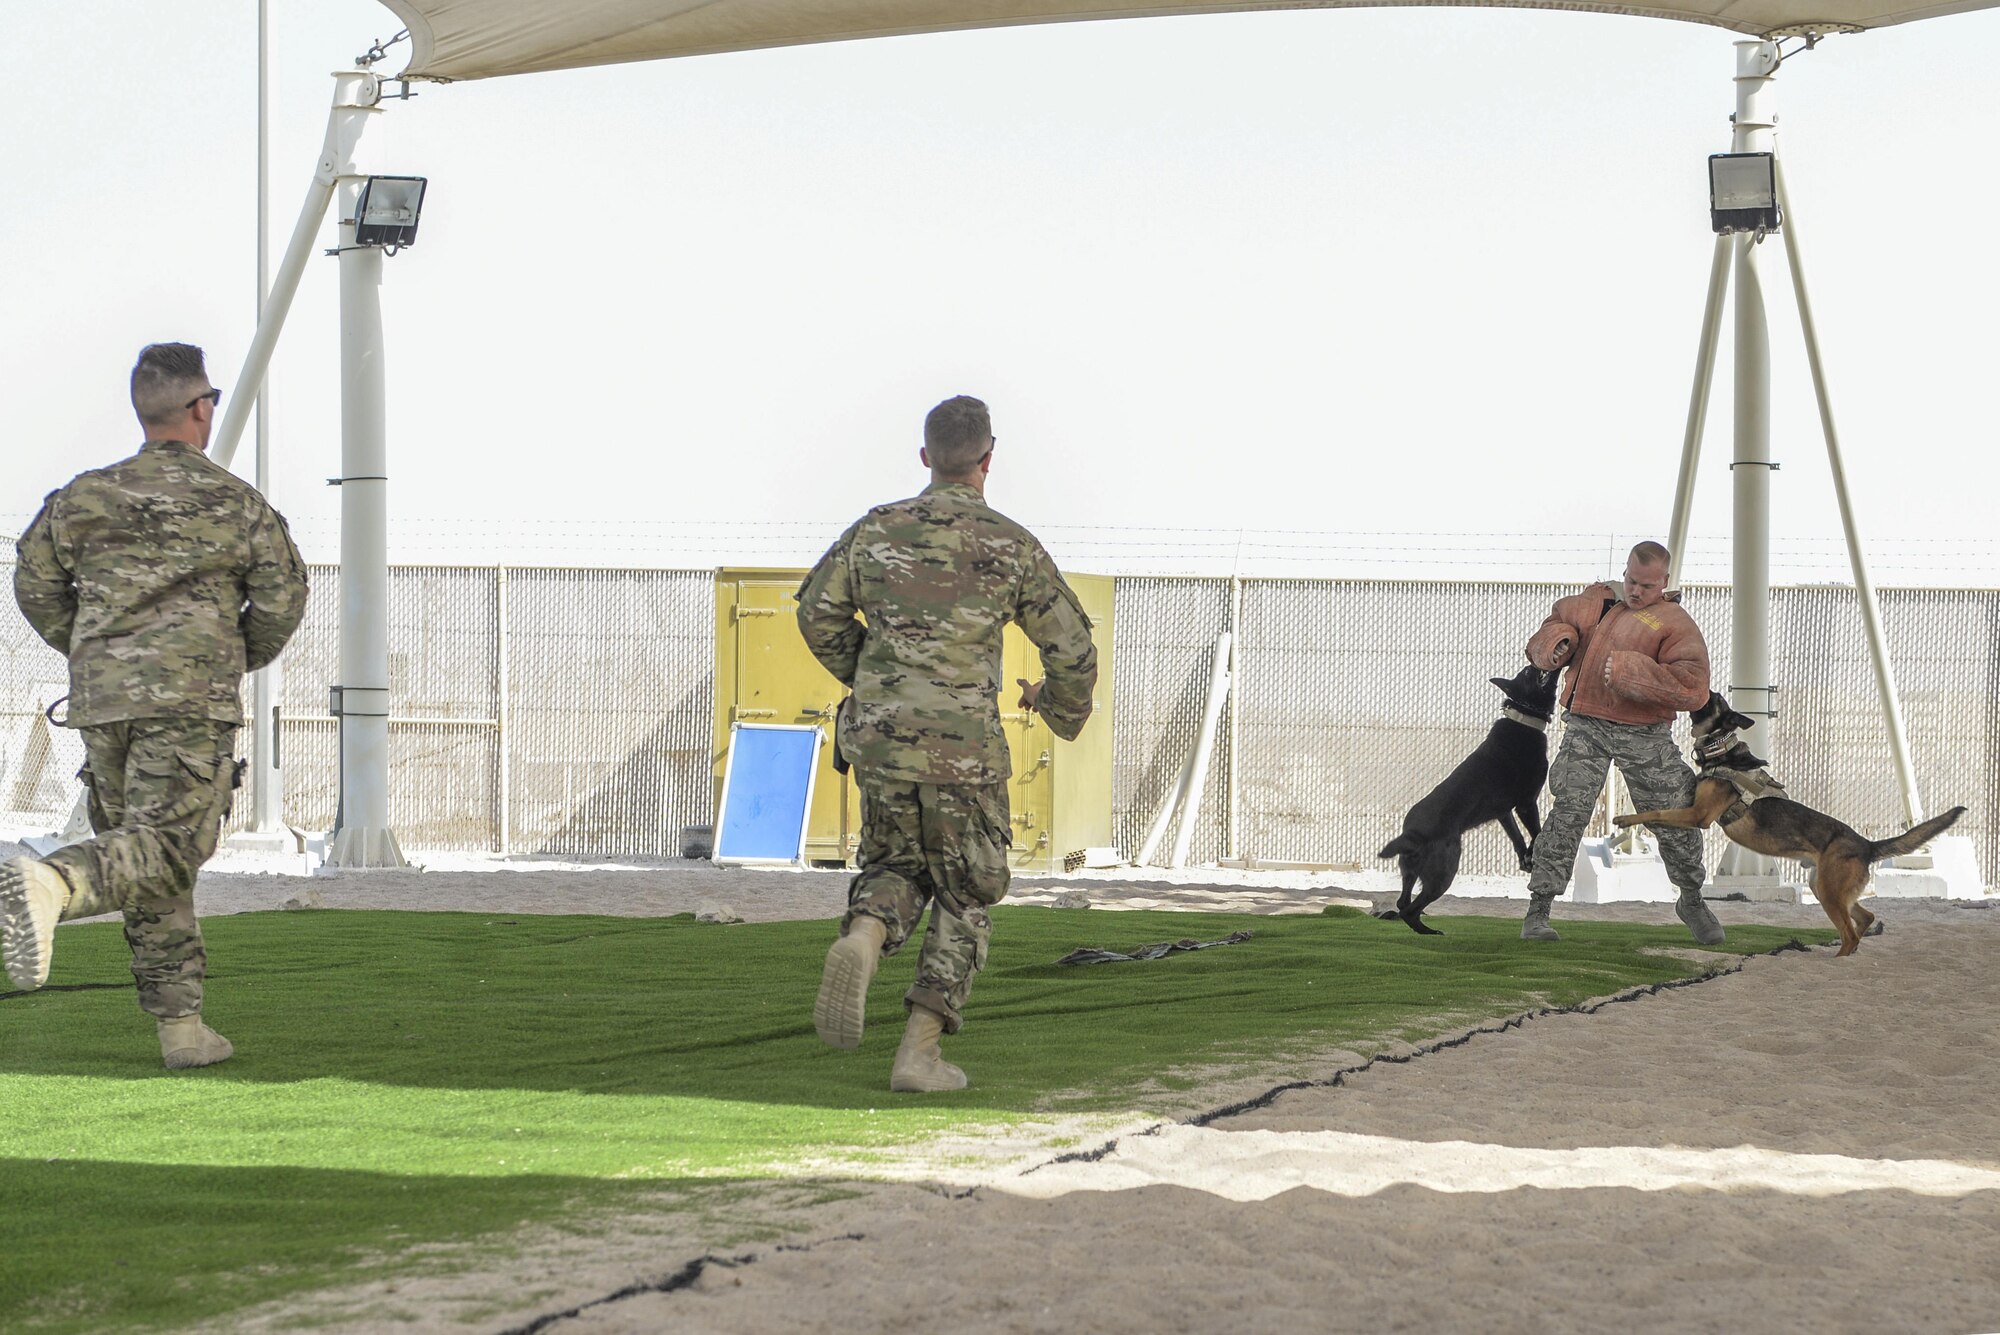 U.S. Air Force Senior Airman Louis Hurbis, military working dog handler assigned to the 379th Expeditionary Security Forces Squadron, is detained by military working dogs, Bady, left, and Hugo, while fellow military working dog handlers Staff Sgts. Brandon Stone, left, and Cole Farley, run toward the “suspect” during a K-9 demonstration exercise at Al Udeid Air Base, Qatar, Aug. 17, 2017.